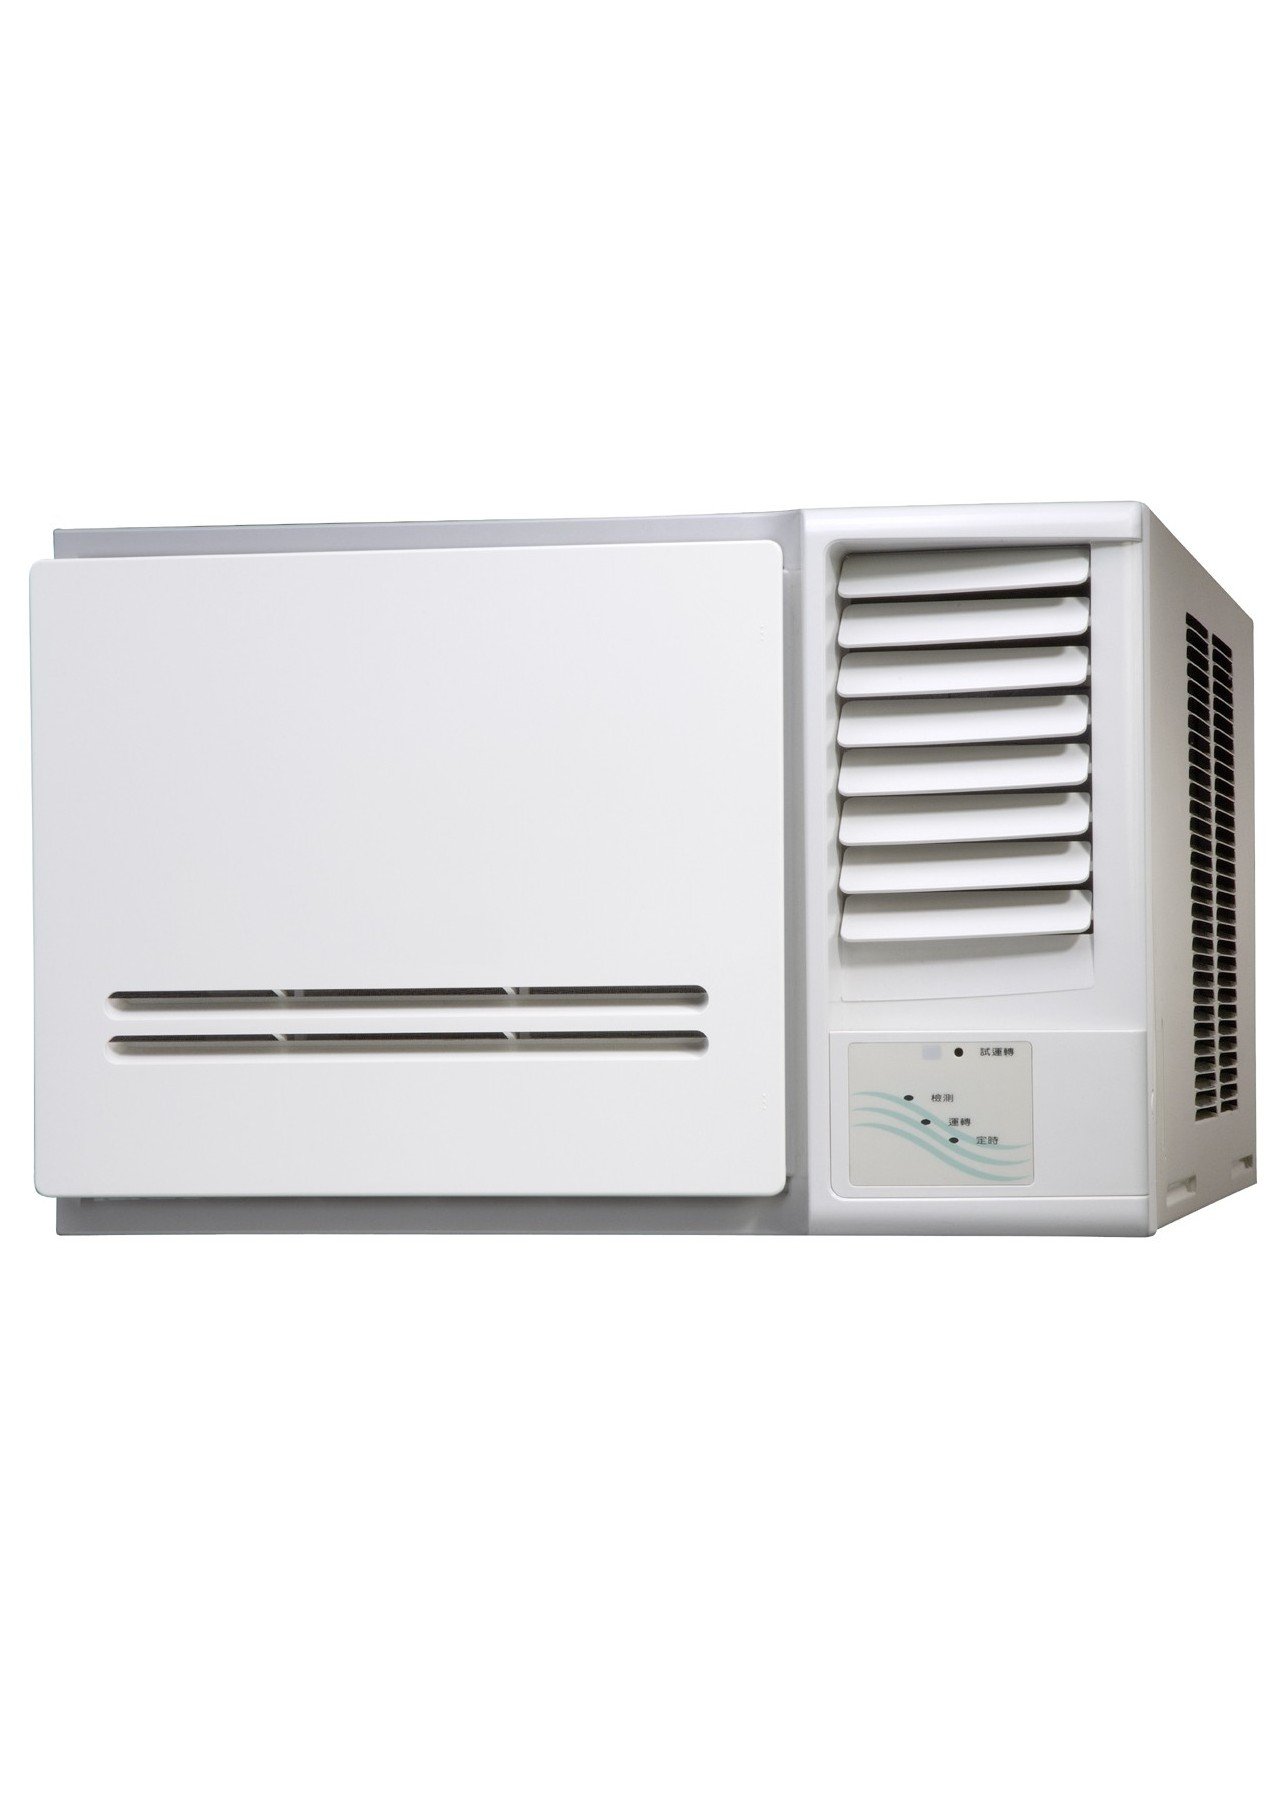 TYPES OF AIR CONDITIONING UNITS AND COOLERS - RAPID HEATBUSTERS